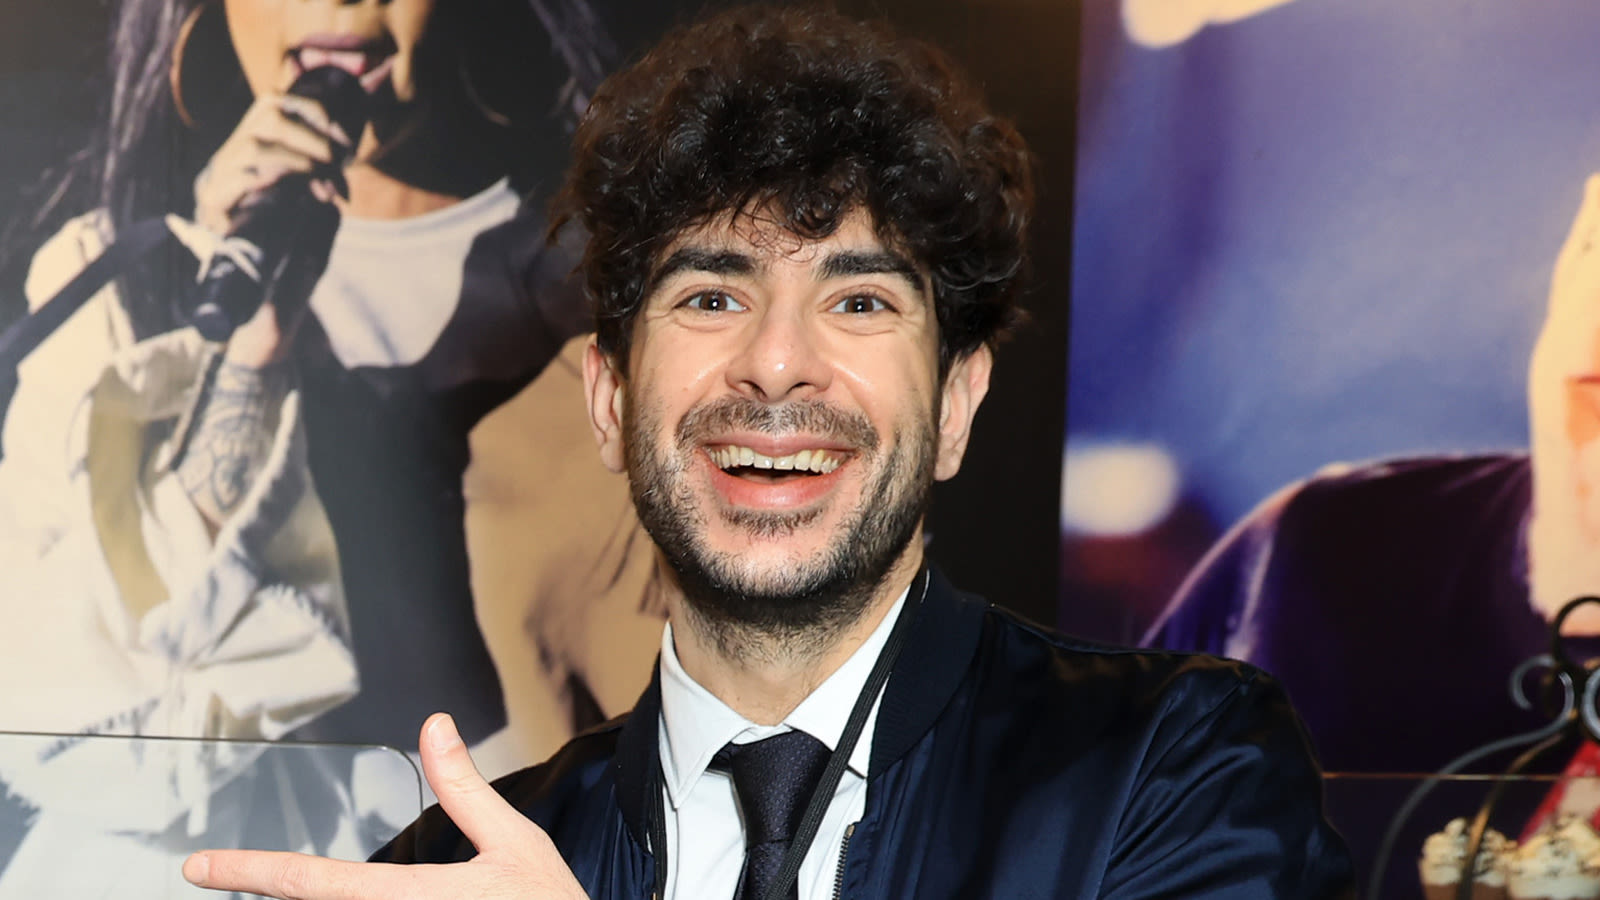 Tony Khan Addresses The Potential For 'Chaos' On AEW Dynamite In His Absence - Wrestling Inc.